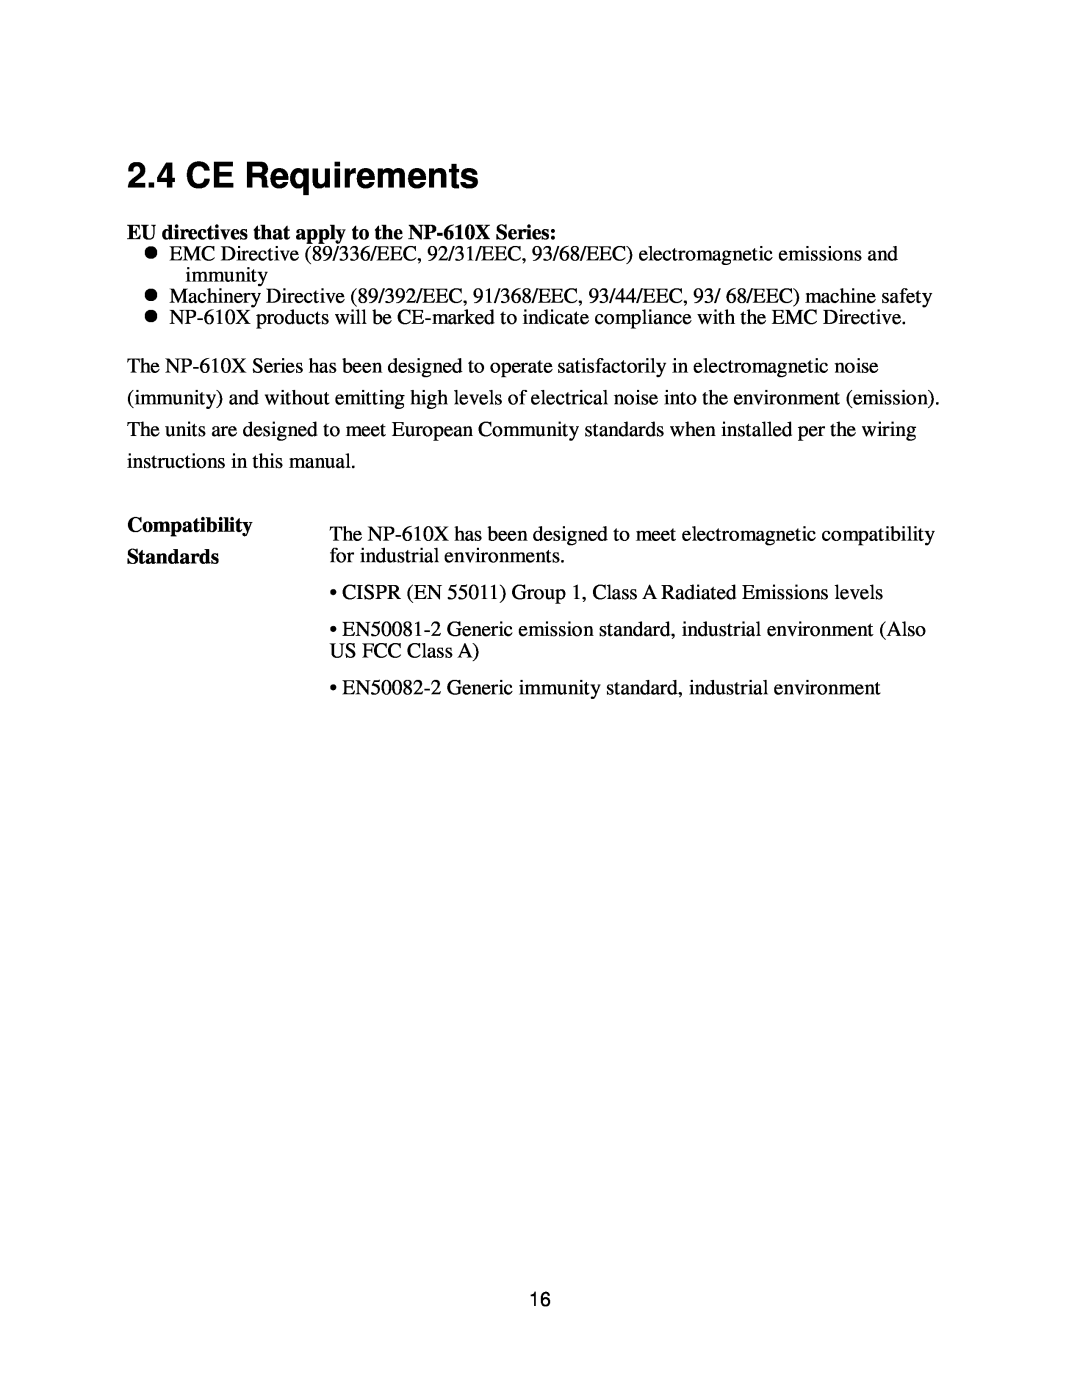 Nextar user manual CE Requirements, EU directives that apply to the NP-610X Series, Compatibility Standards 